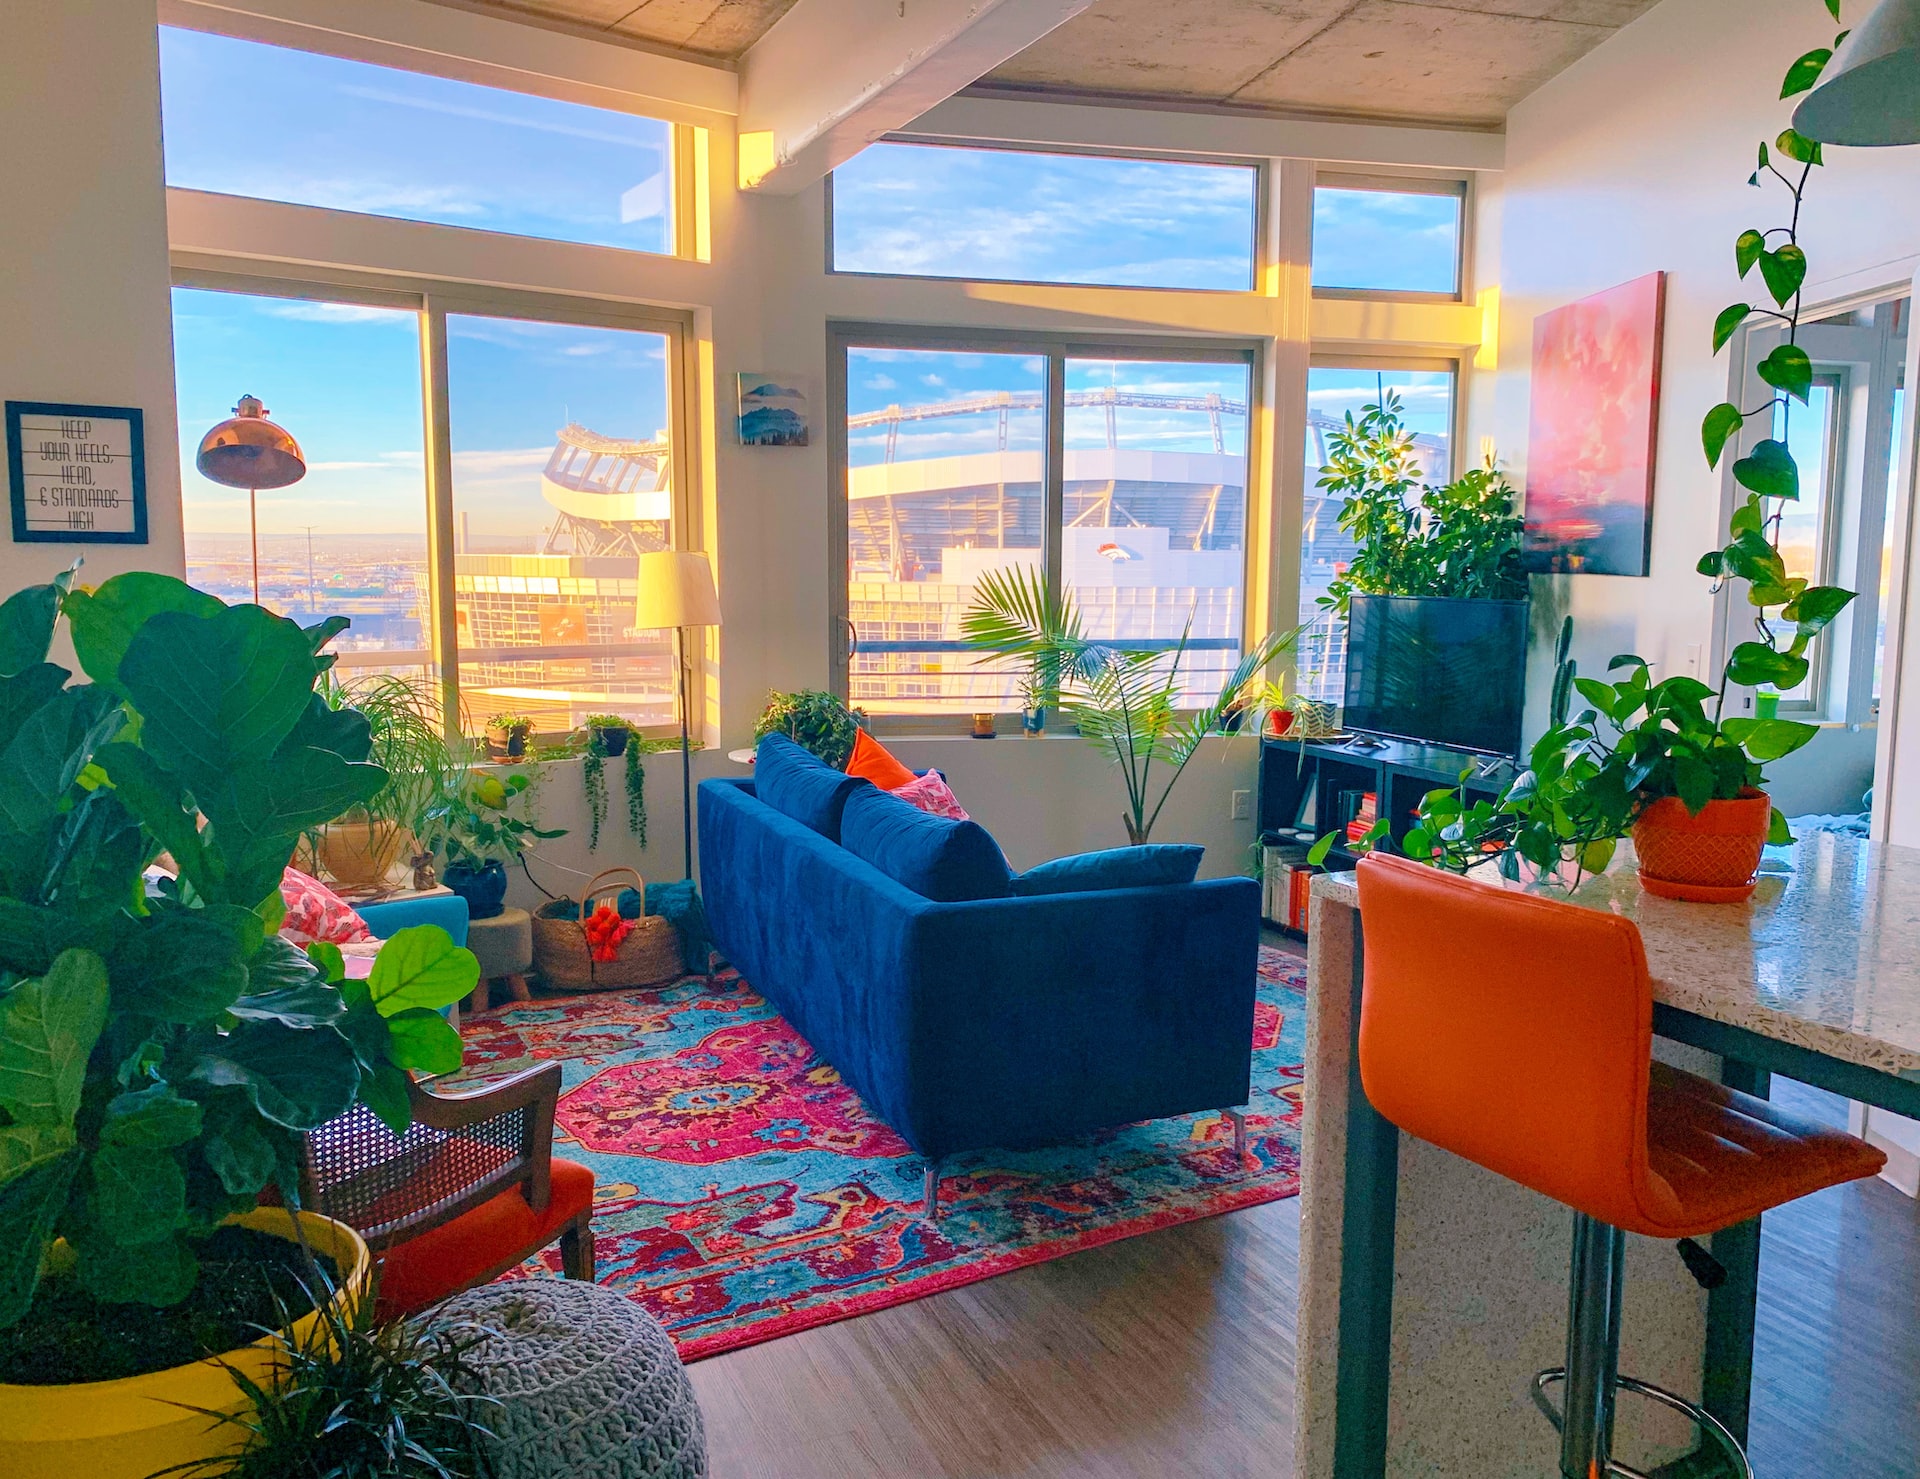 Apartment with lots of plants